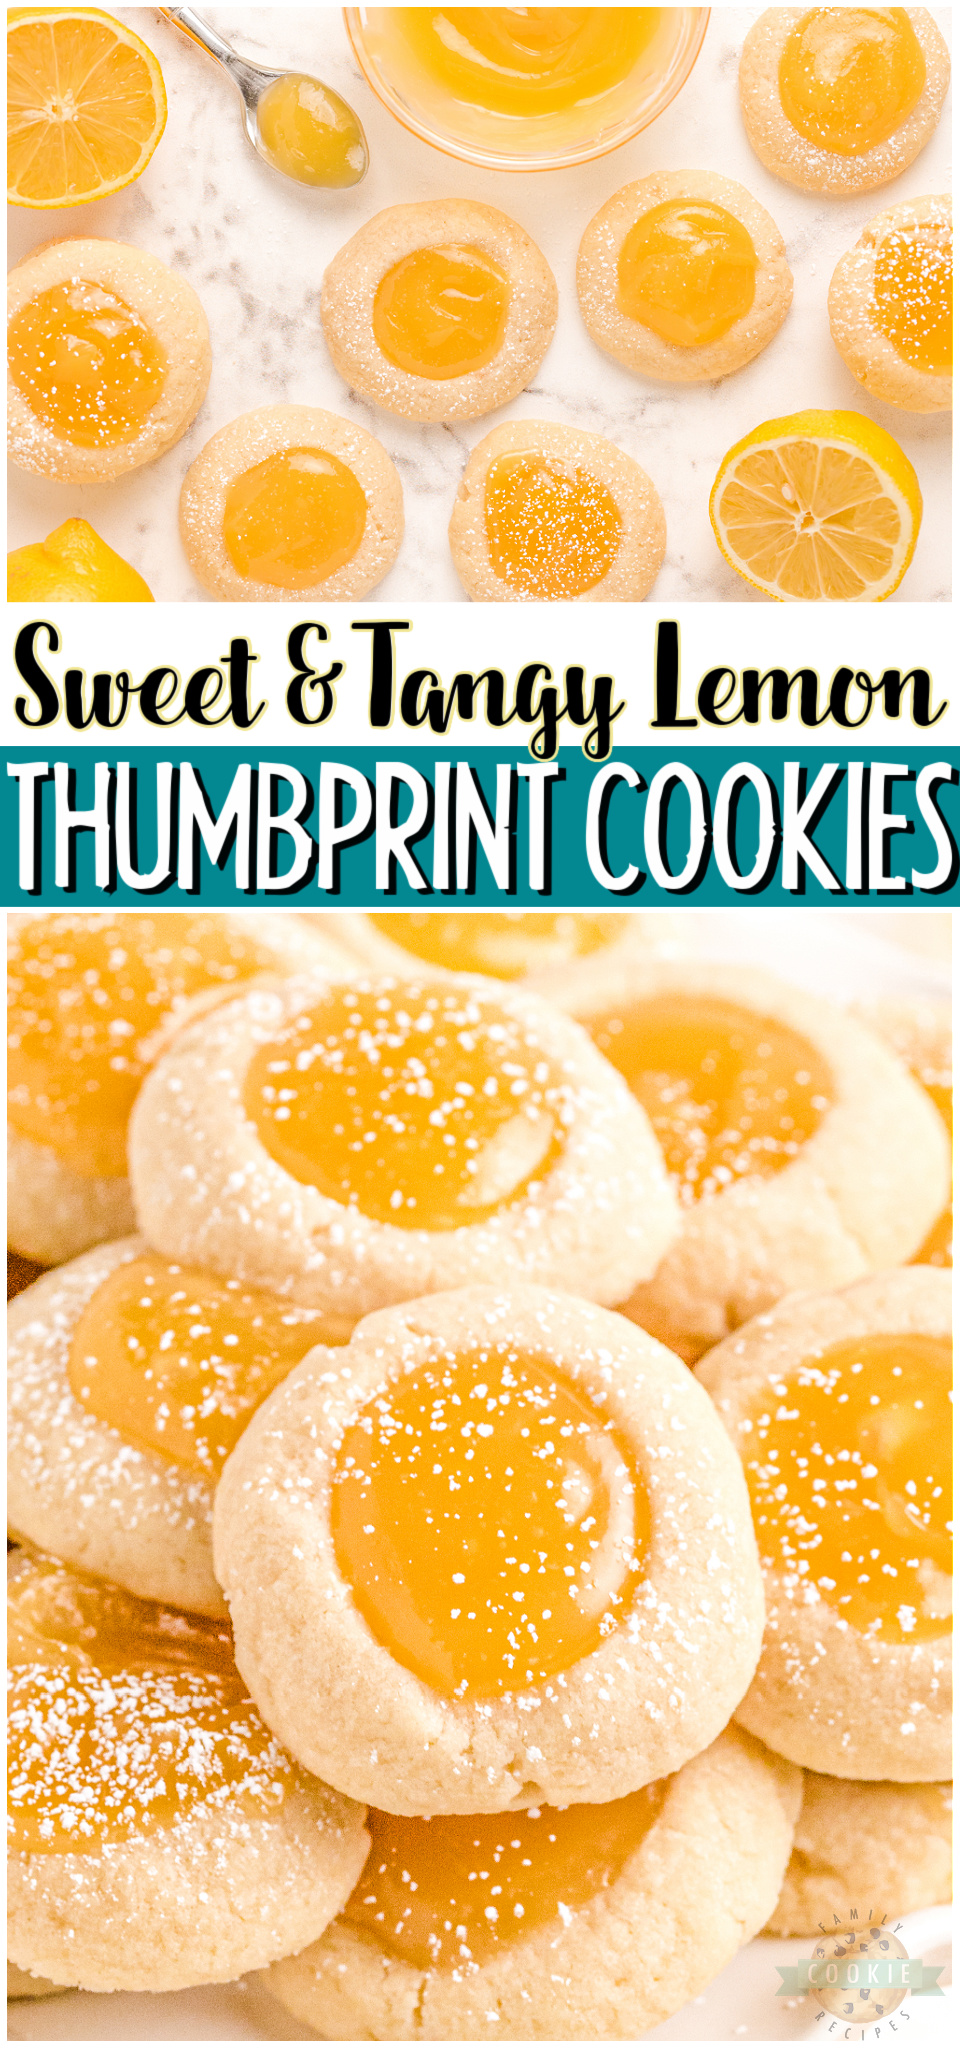 Lemon thumbprint cookies made with buttery soft cookies & filled with creamy lemon curd! Perfectly sweet & tart thumbprint cookies with bright lemon flavor.